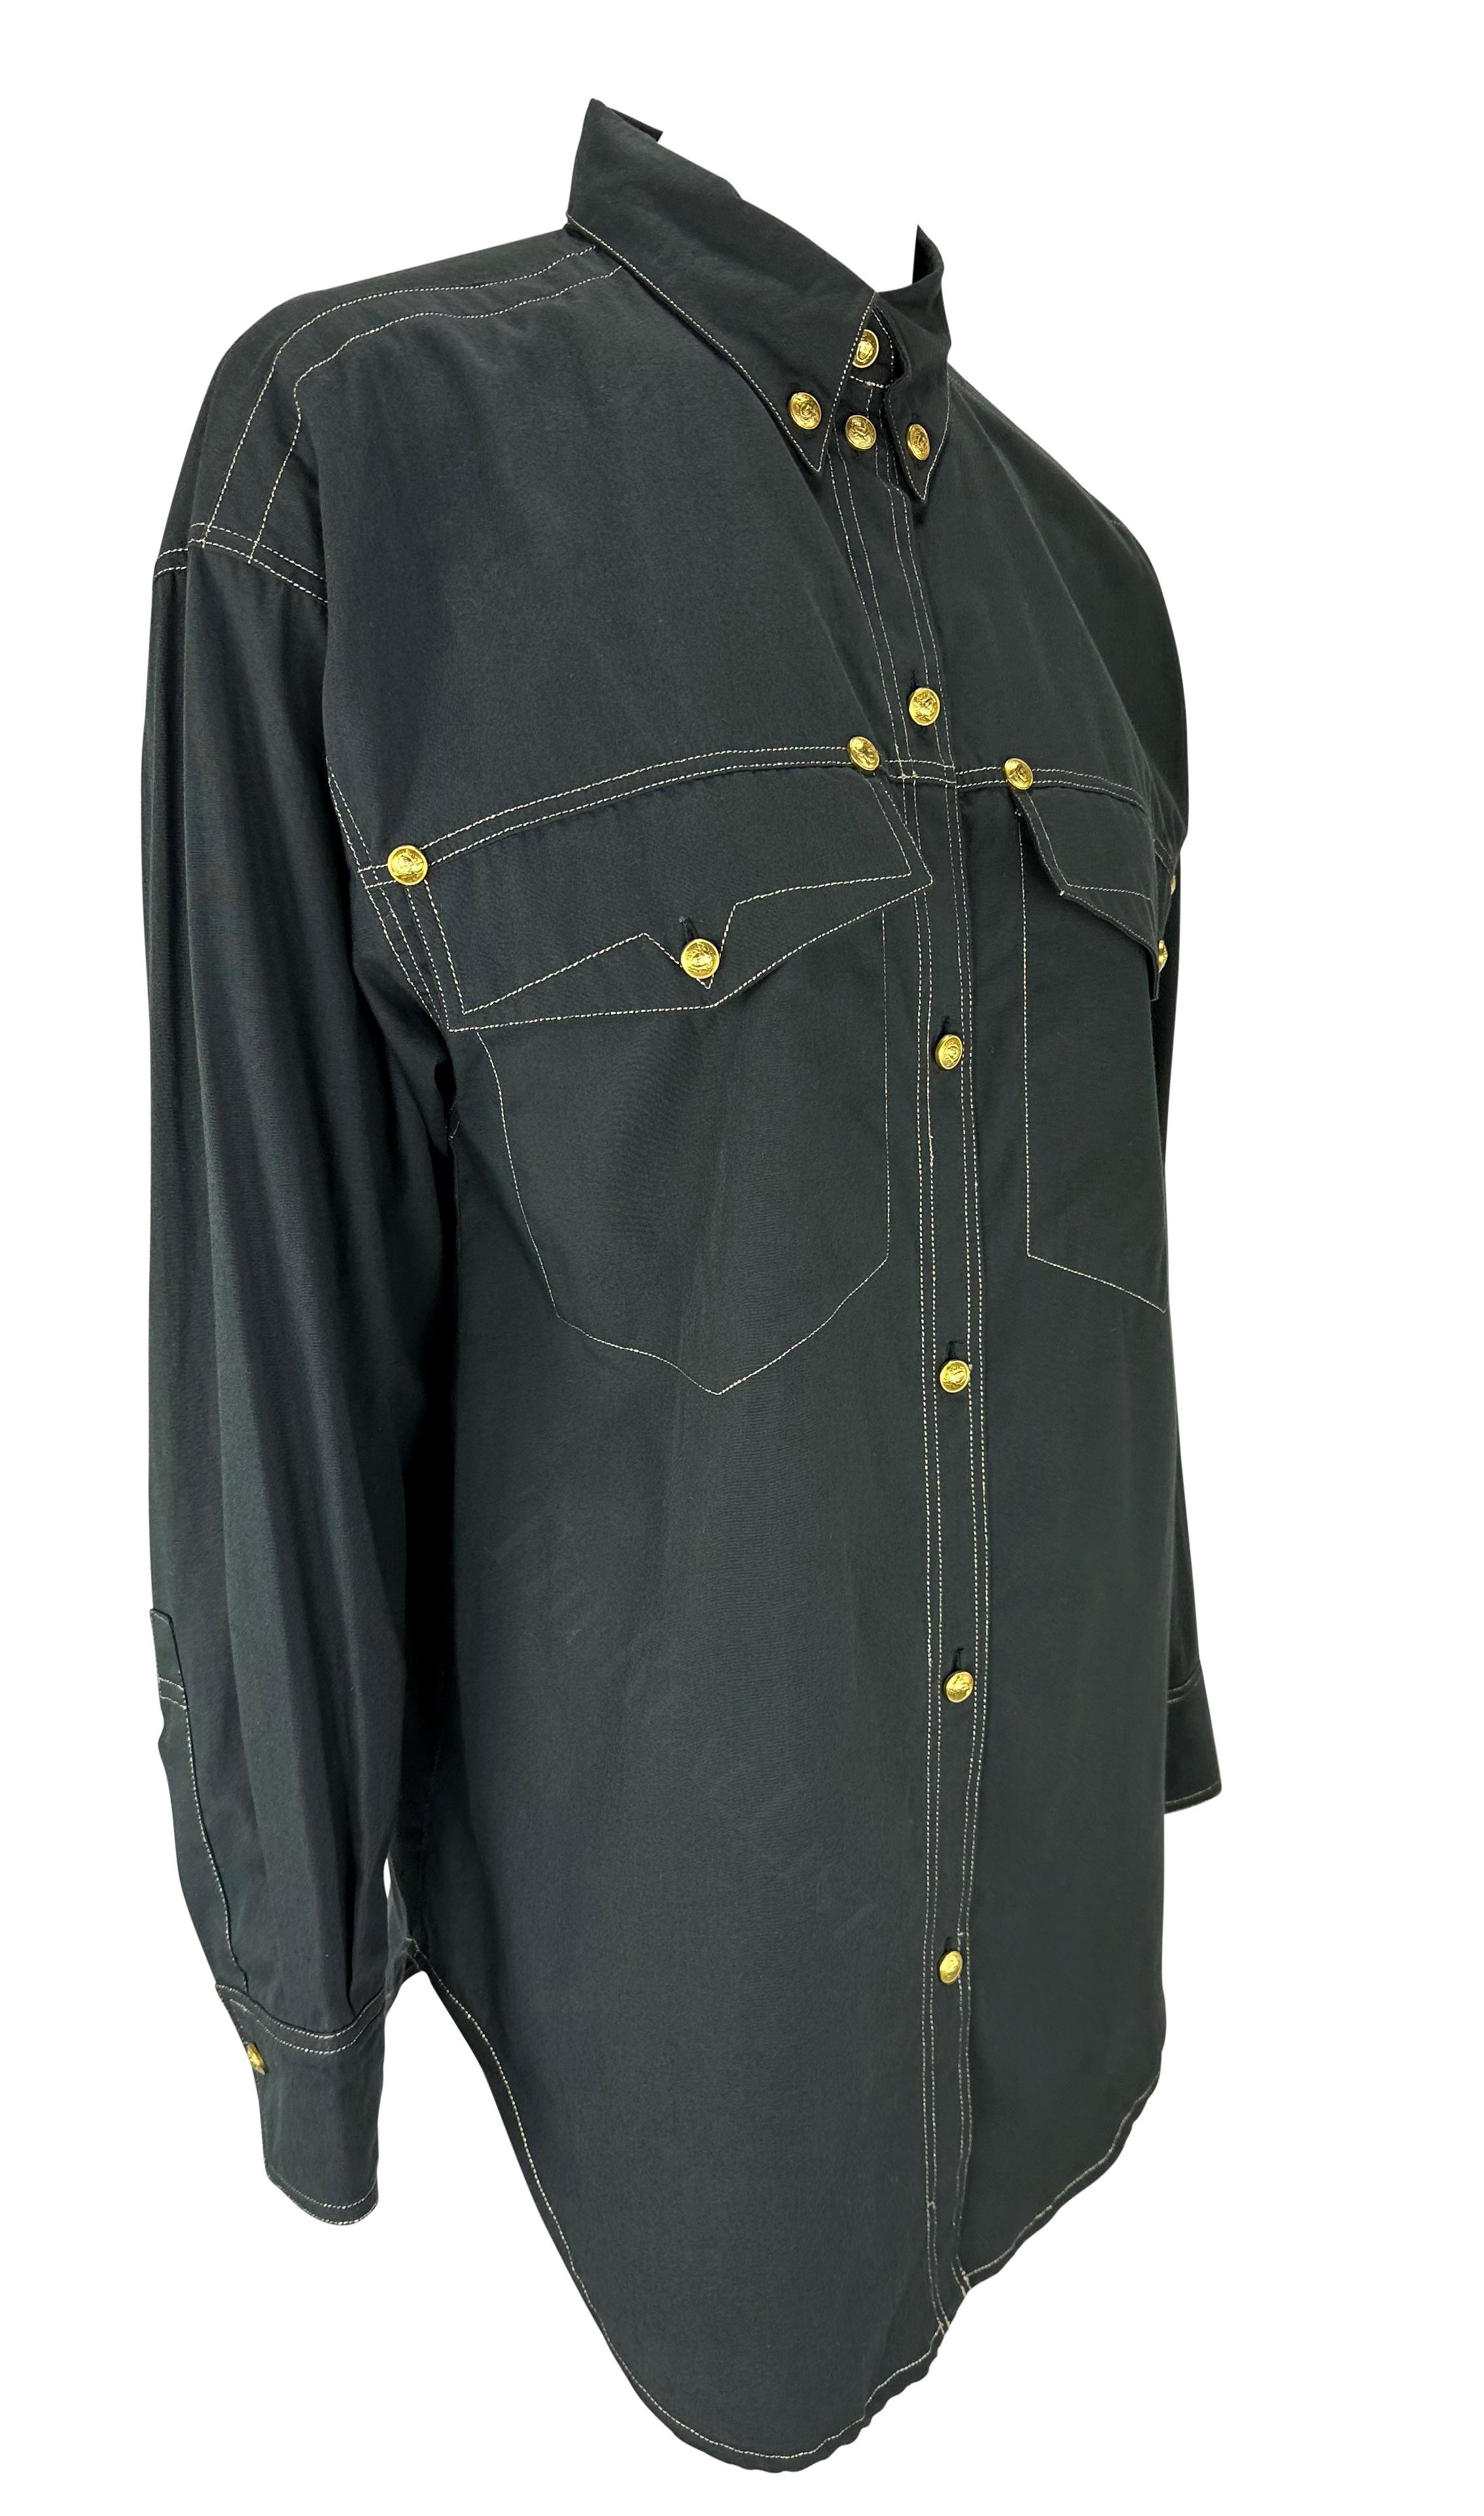 F/W 1992 Gianni Versace Gold Medusa Logo Black Western Style Button Up Shirt For Sale 2